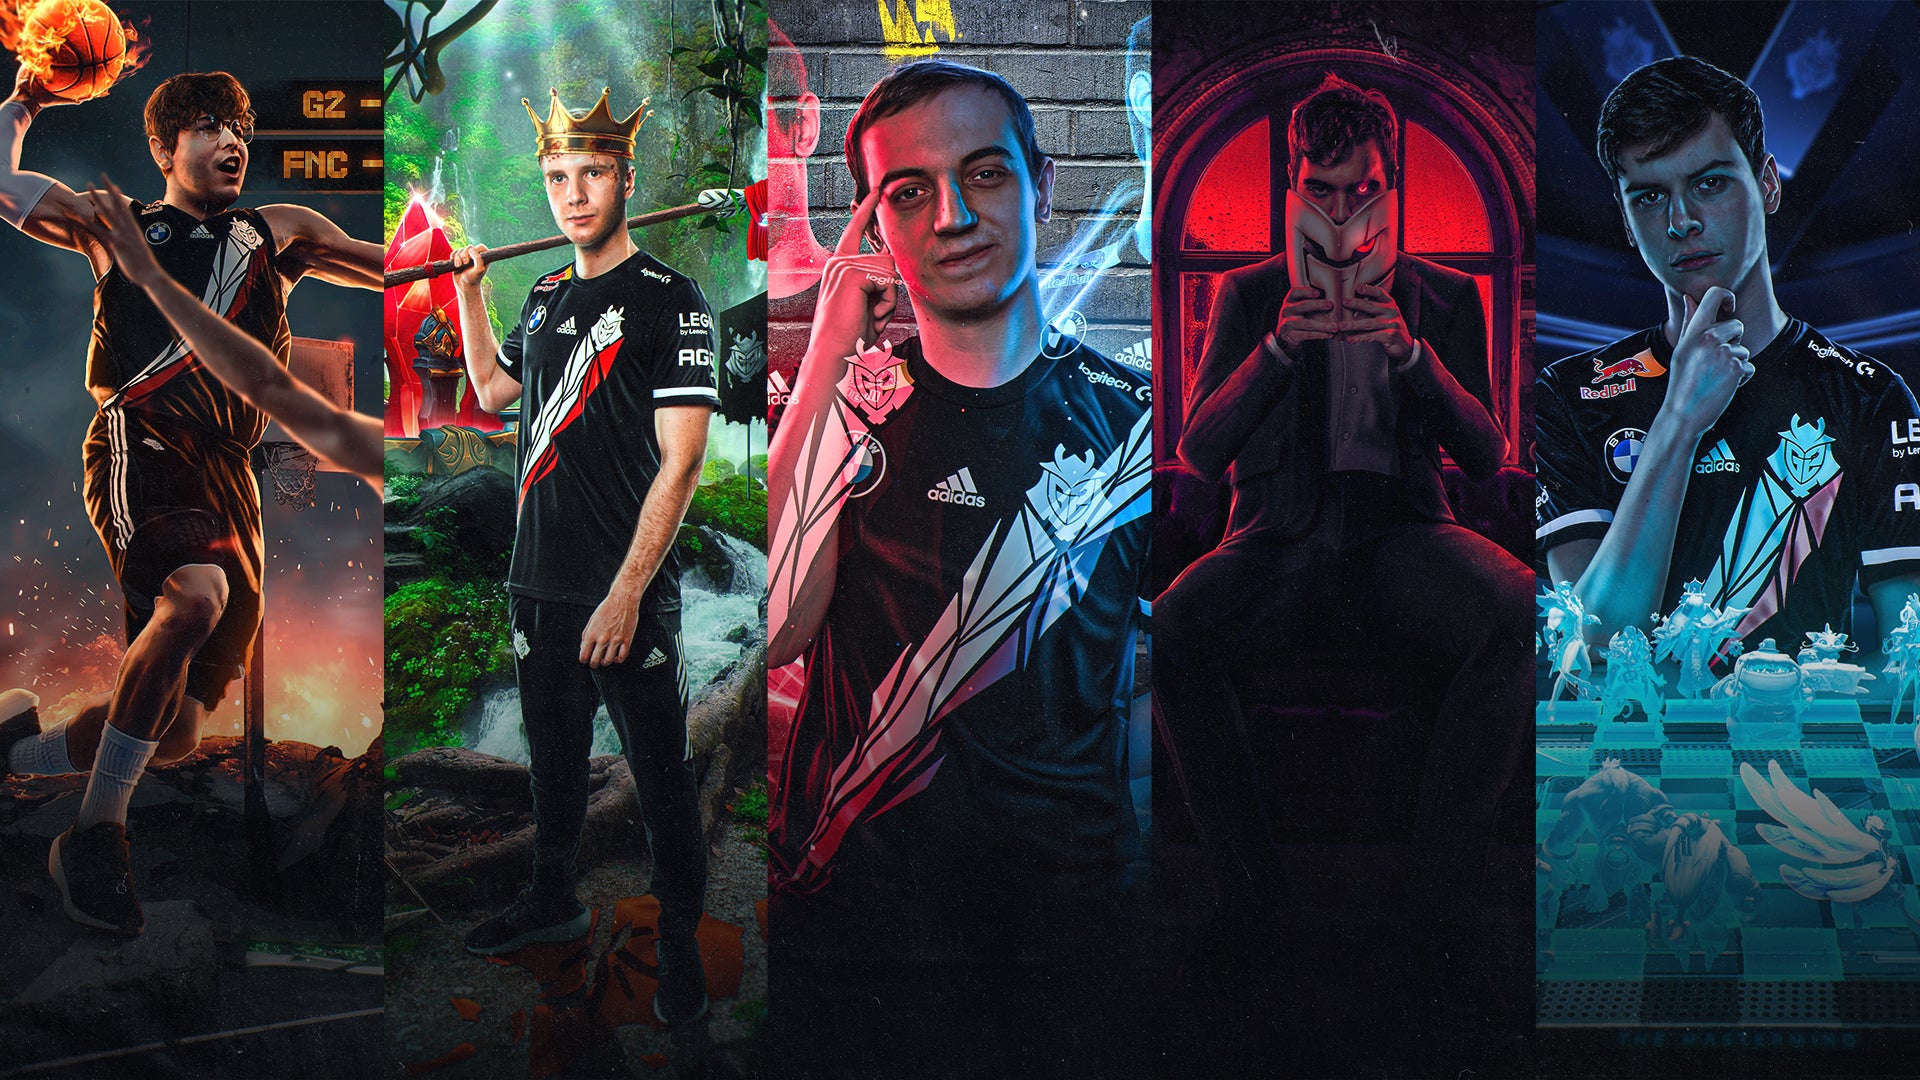 G2 LEC Playoffs Posters Pack